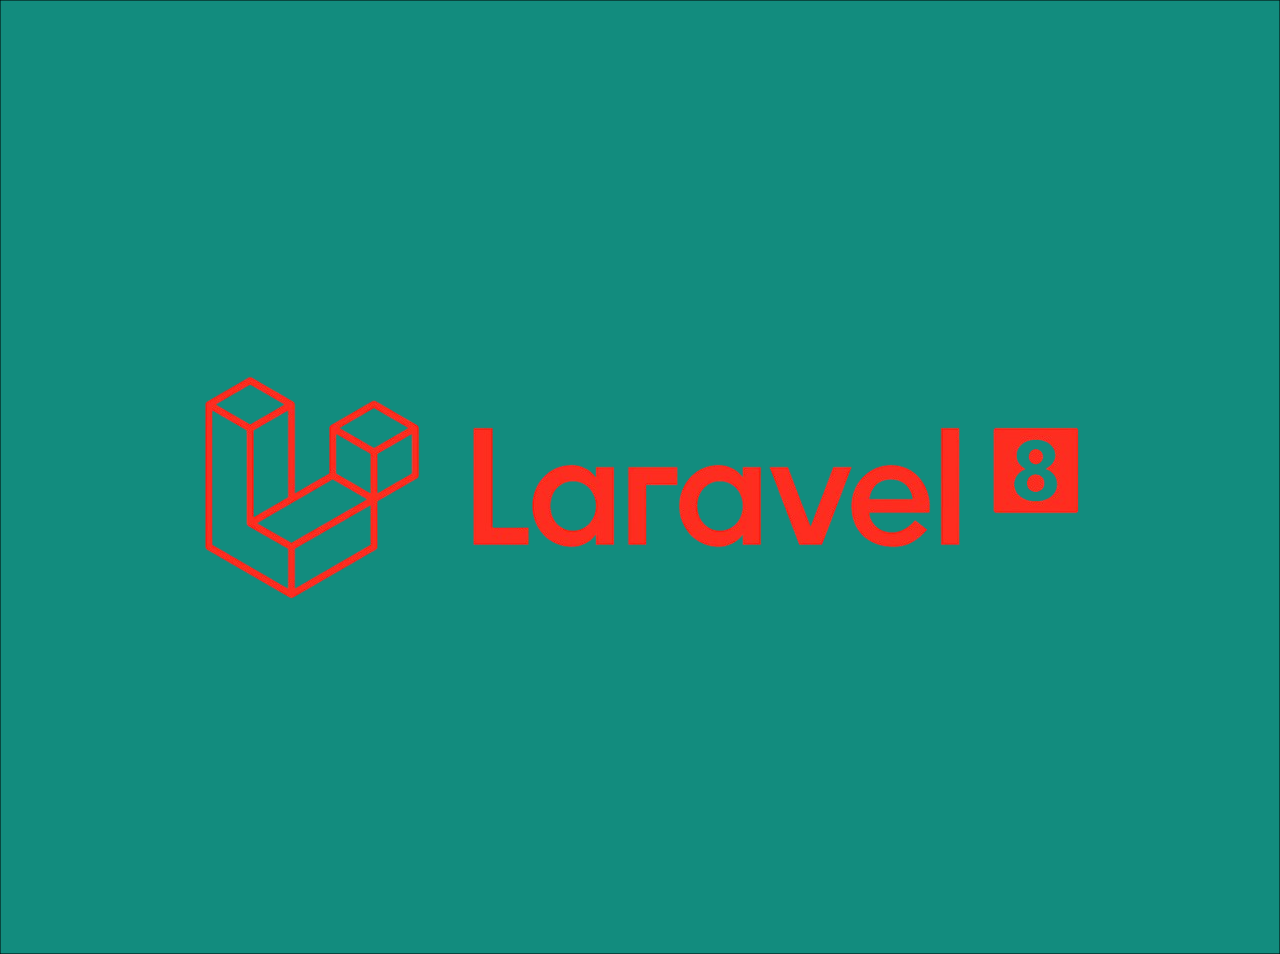 What is new in Laravel 8